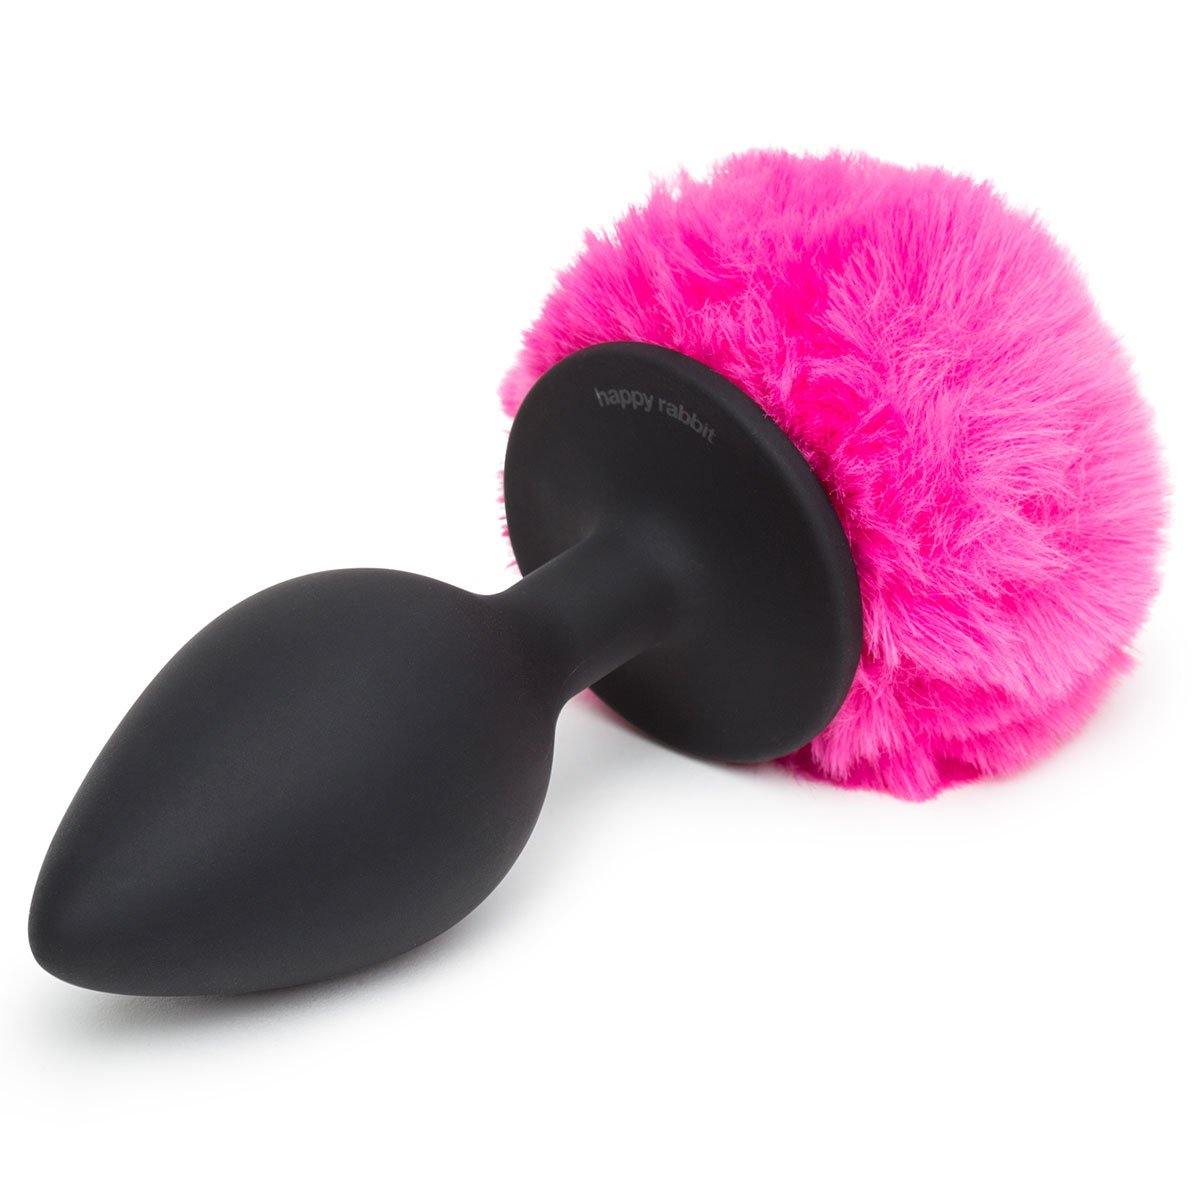 Happy Rabbit Butt Plug Black-Pink Tail Large - Buy At Luxury Toy X - Free 3-Day Shipping